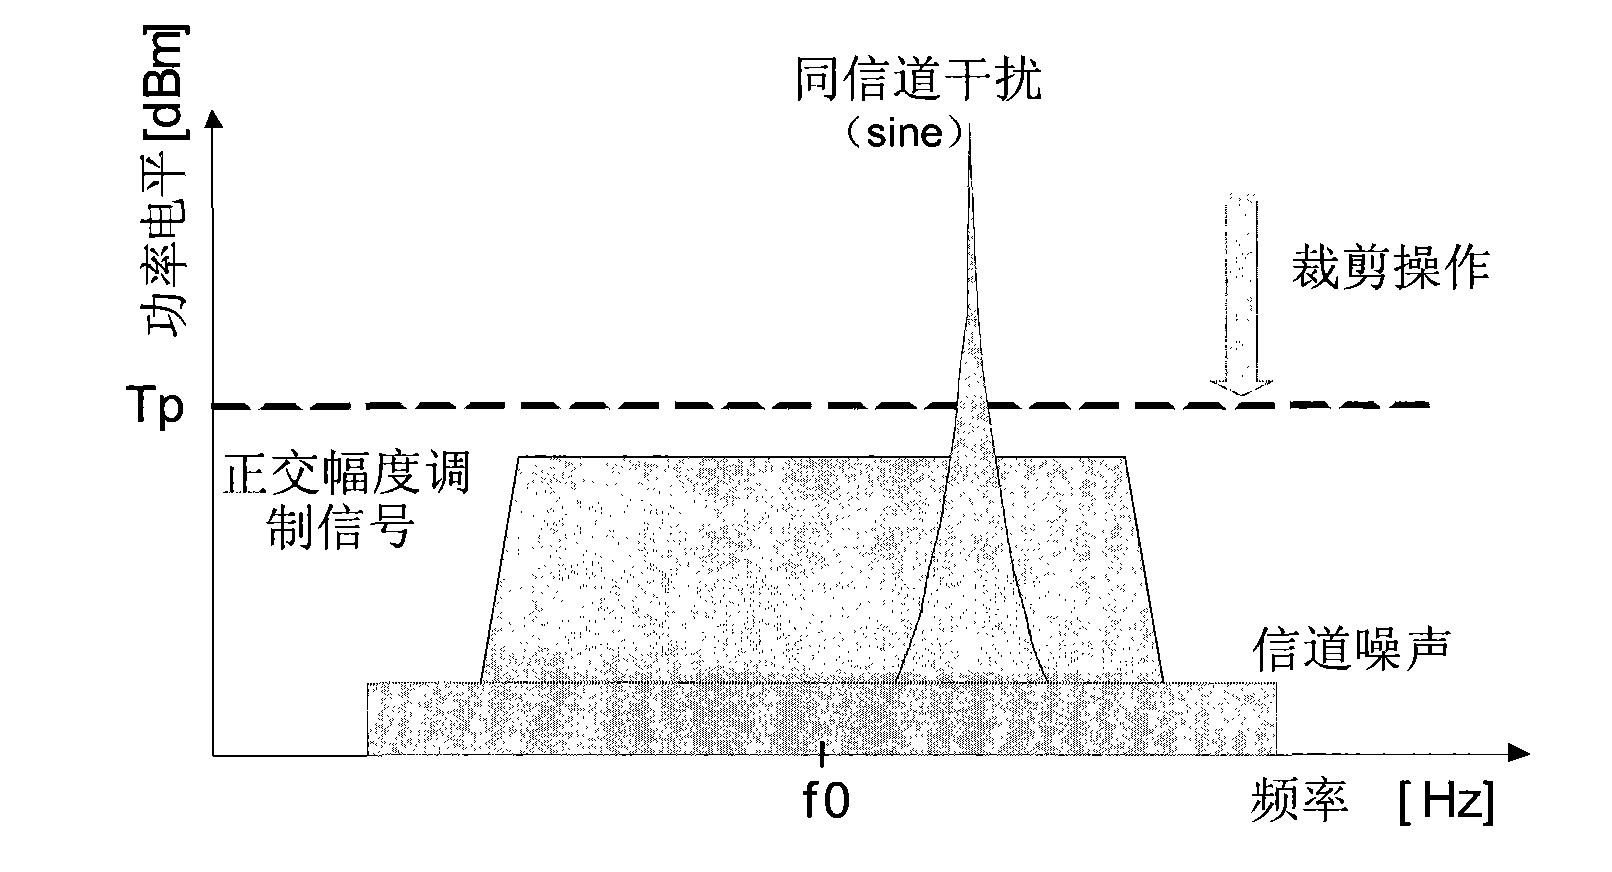 Method and device for eliminating co-channel interference in quadrature amplitude modulation signals